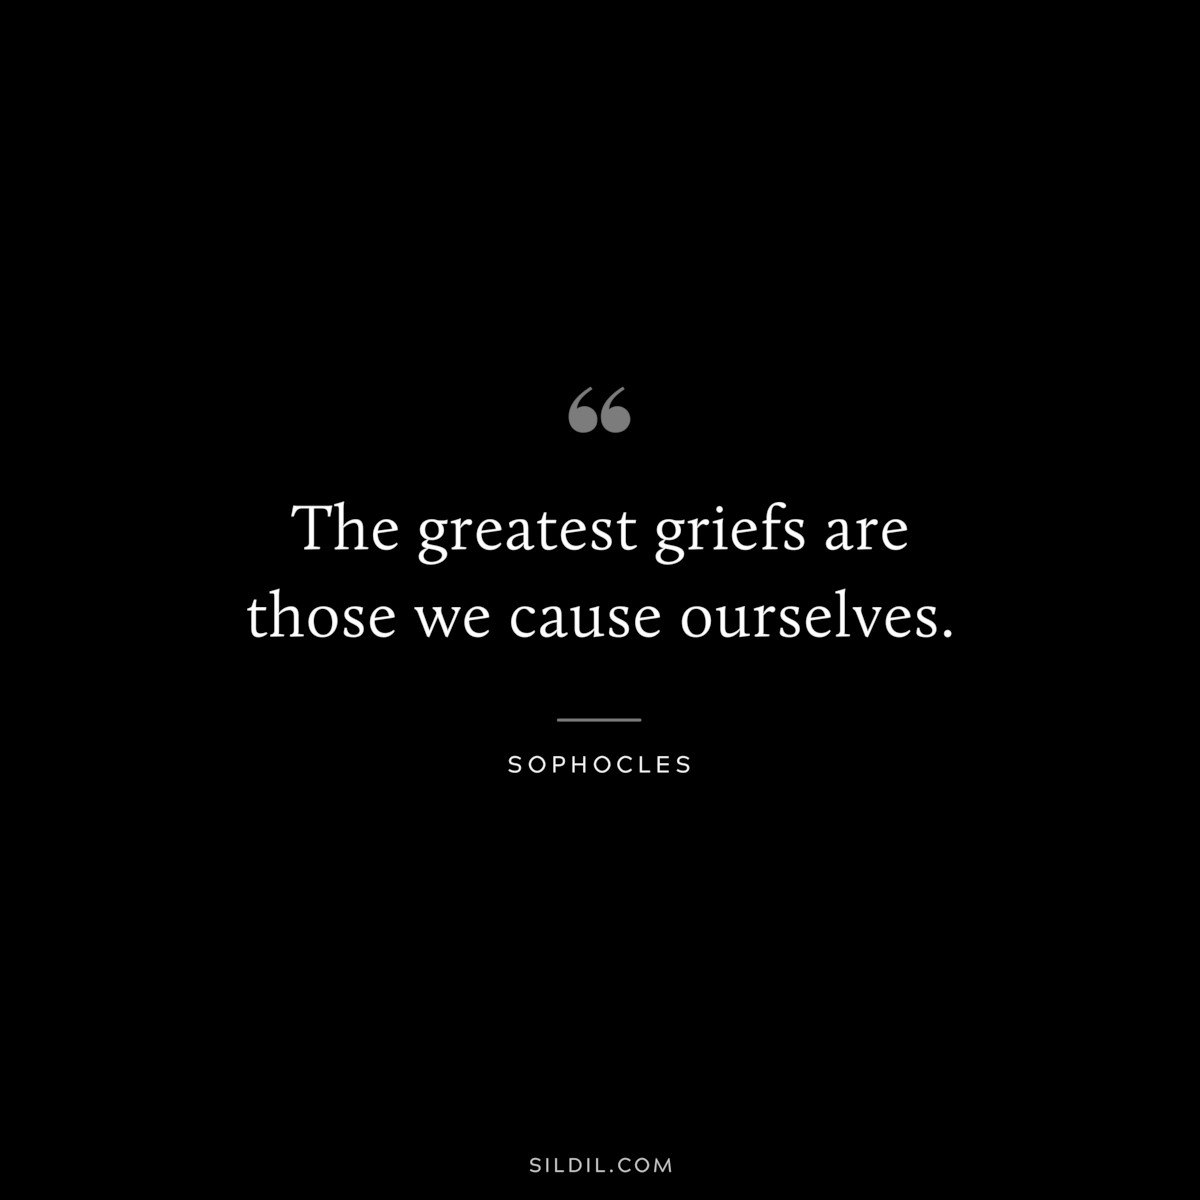 The greatest griefs are those we cause ourselves. ― Sophocles